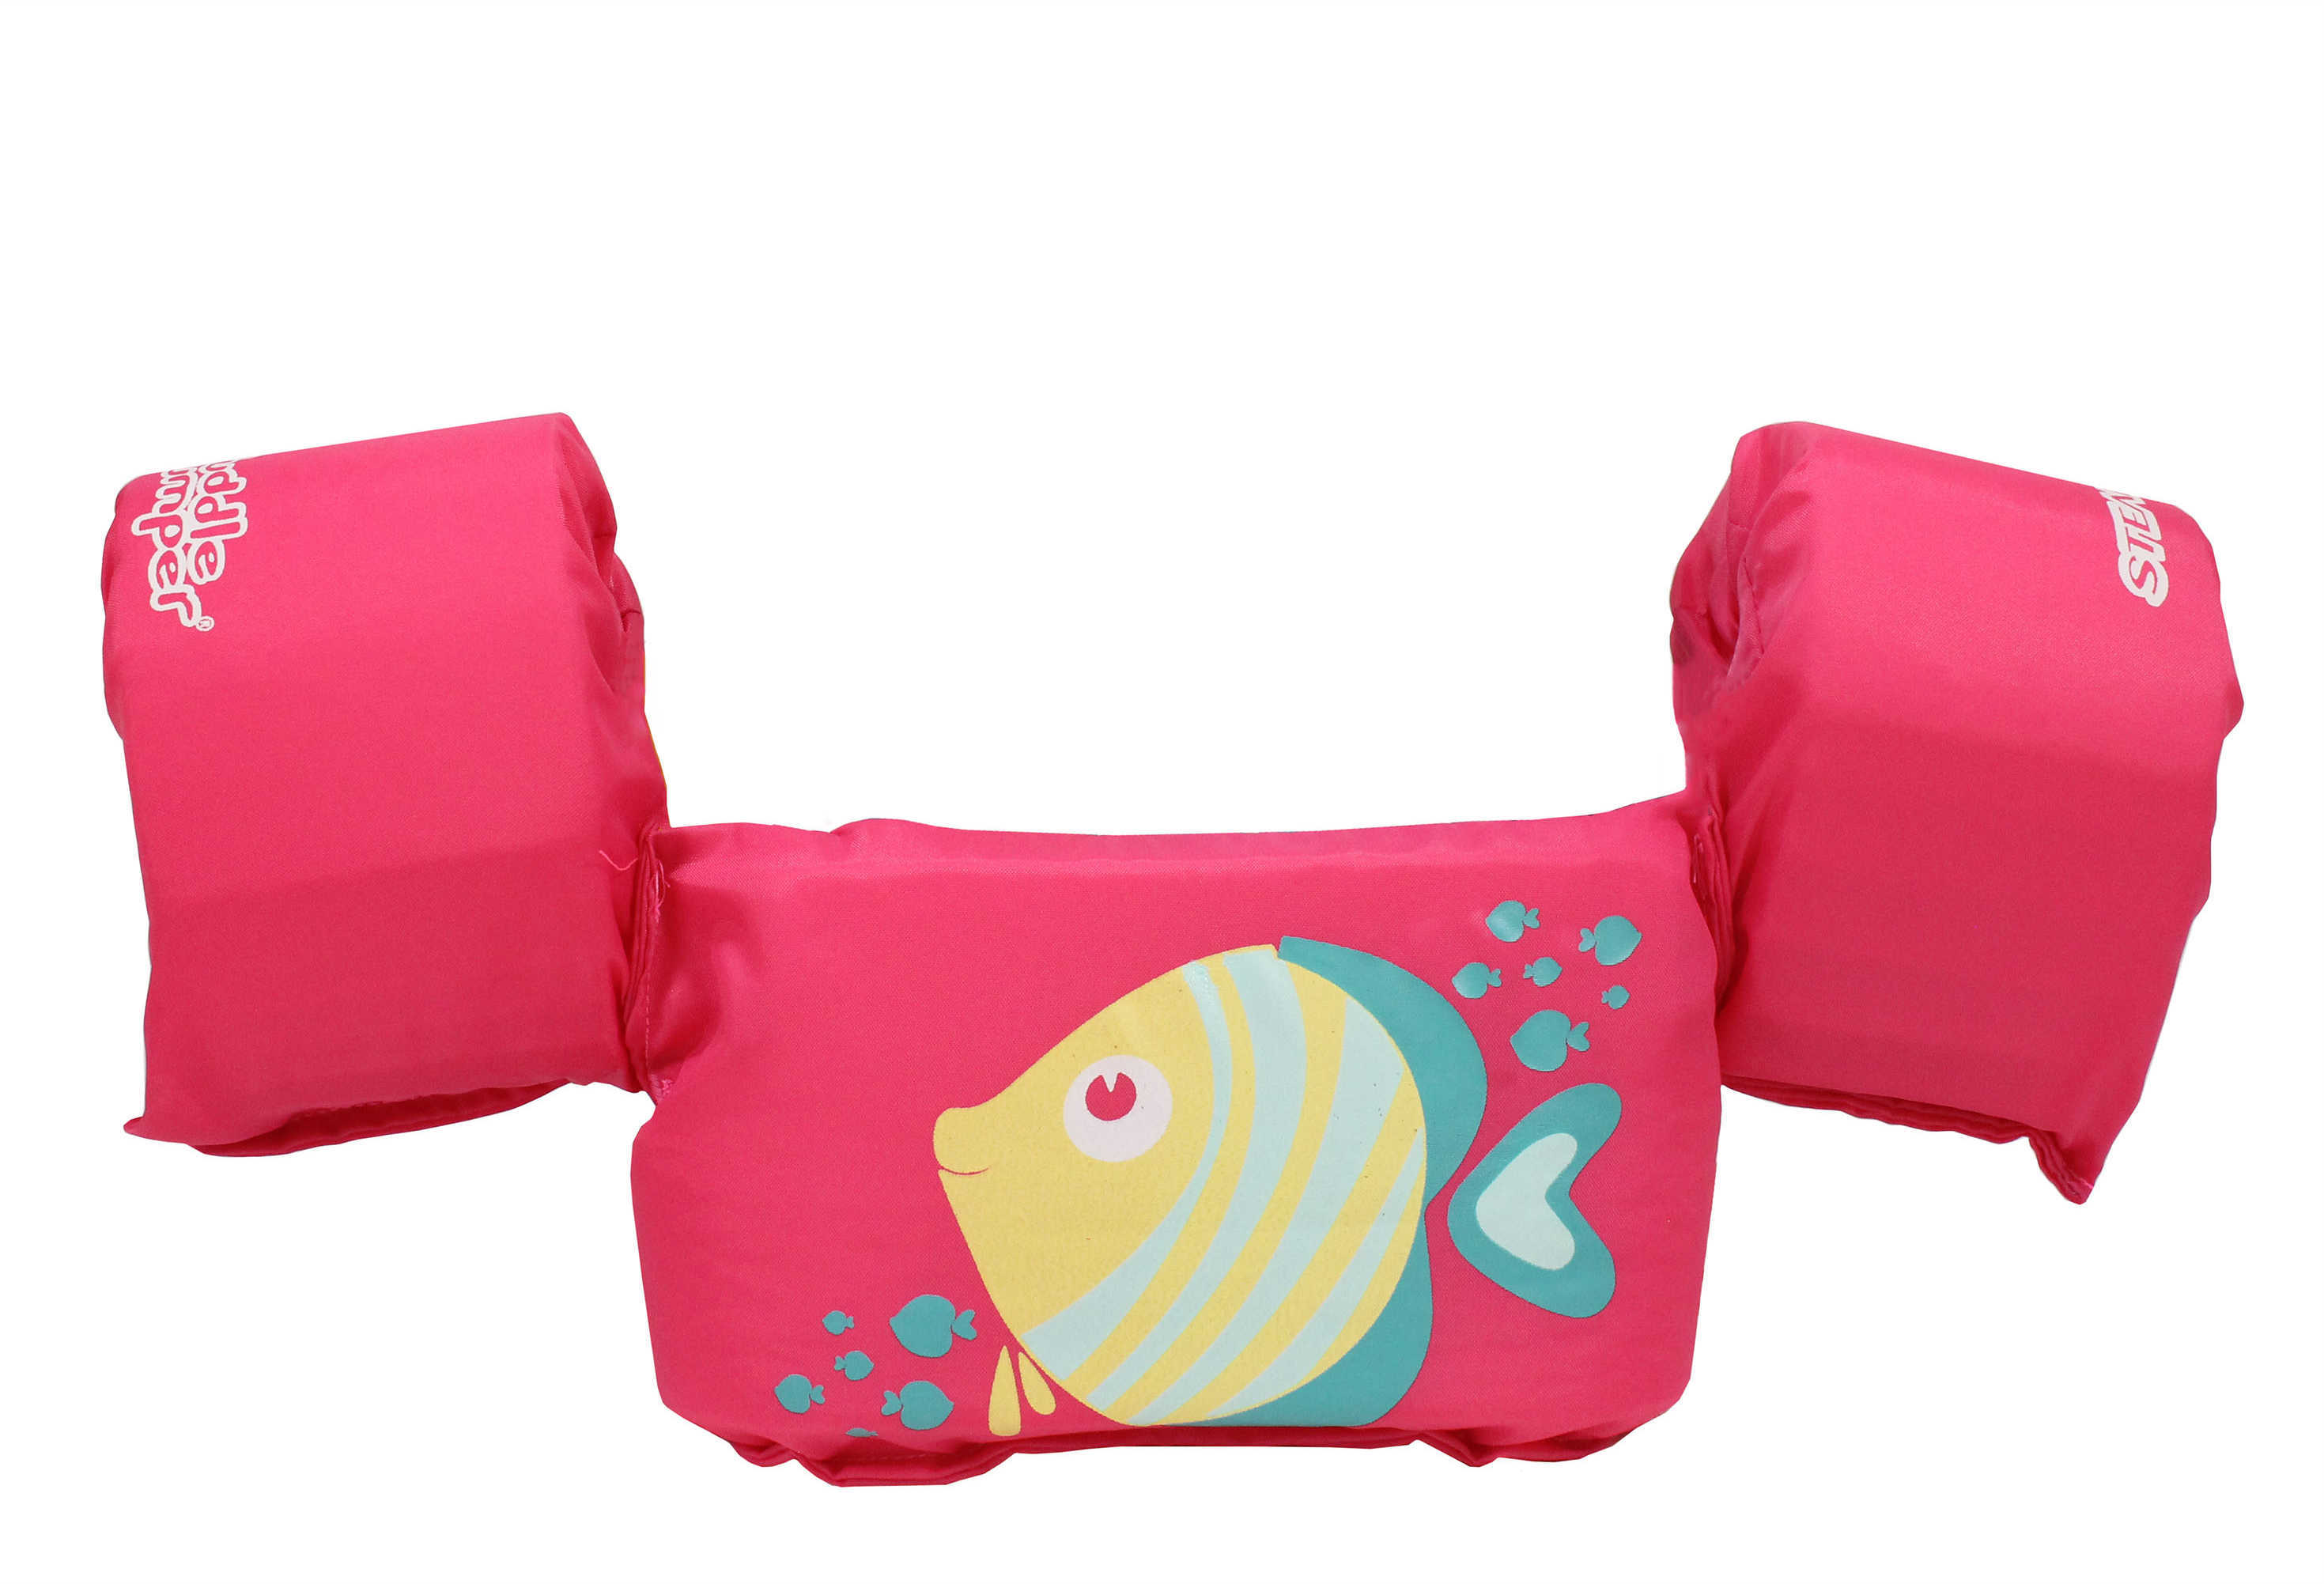 Stearns Puddle Jumper Deluxe Life Jacket Pink Fish Md: 3000004731